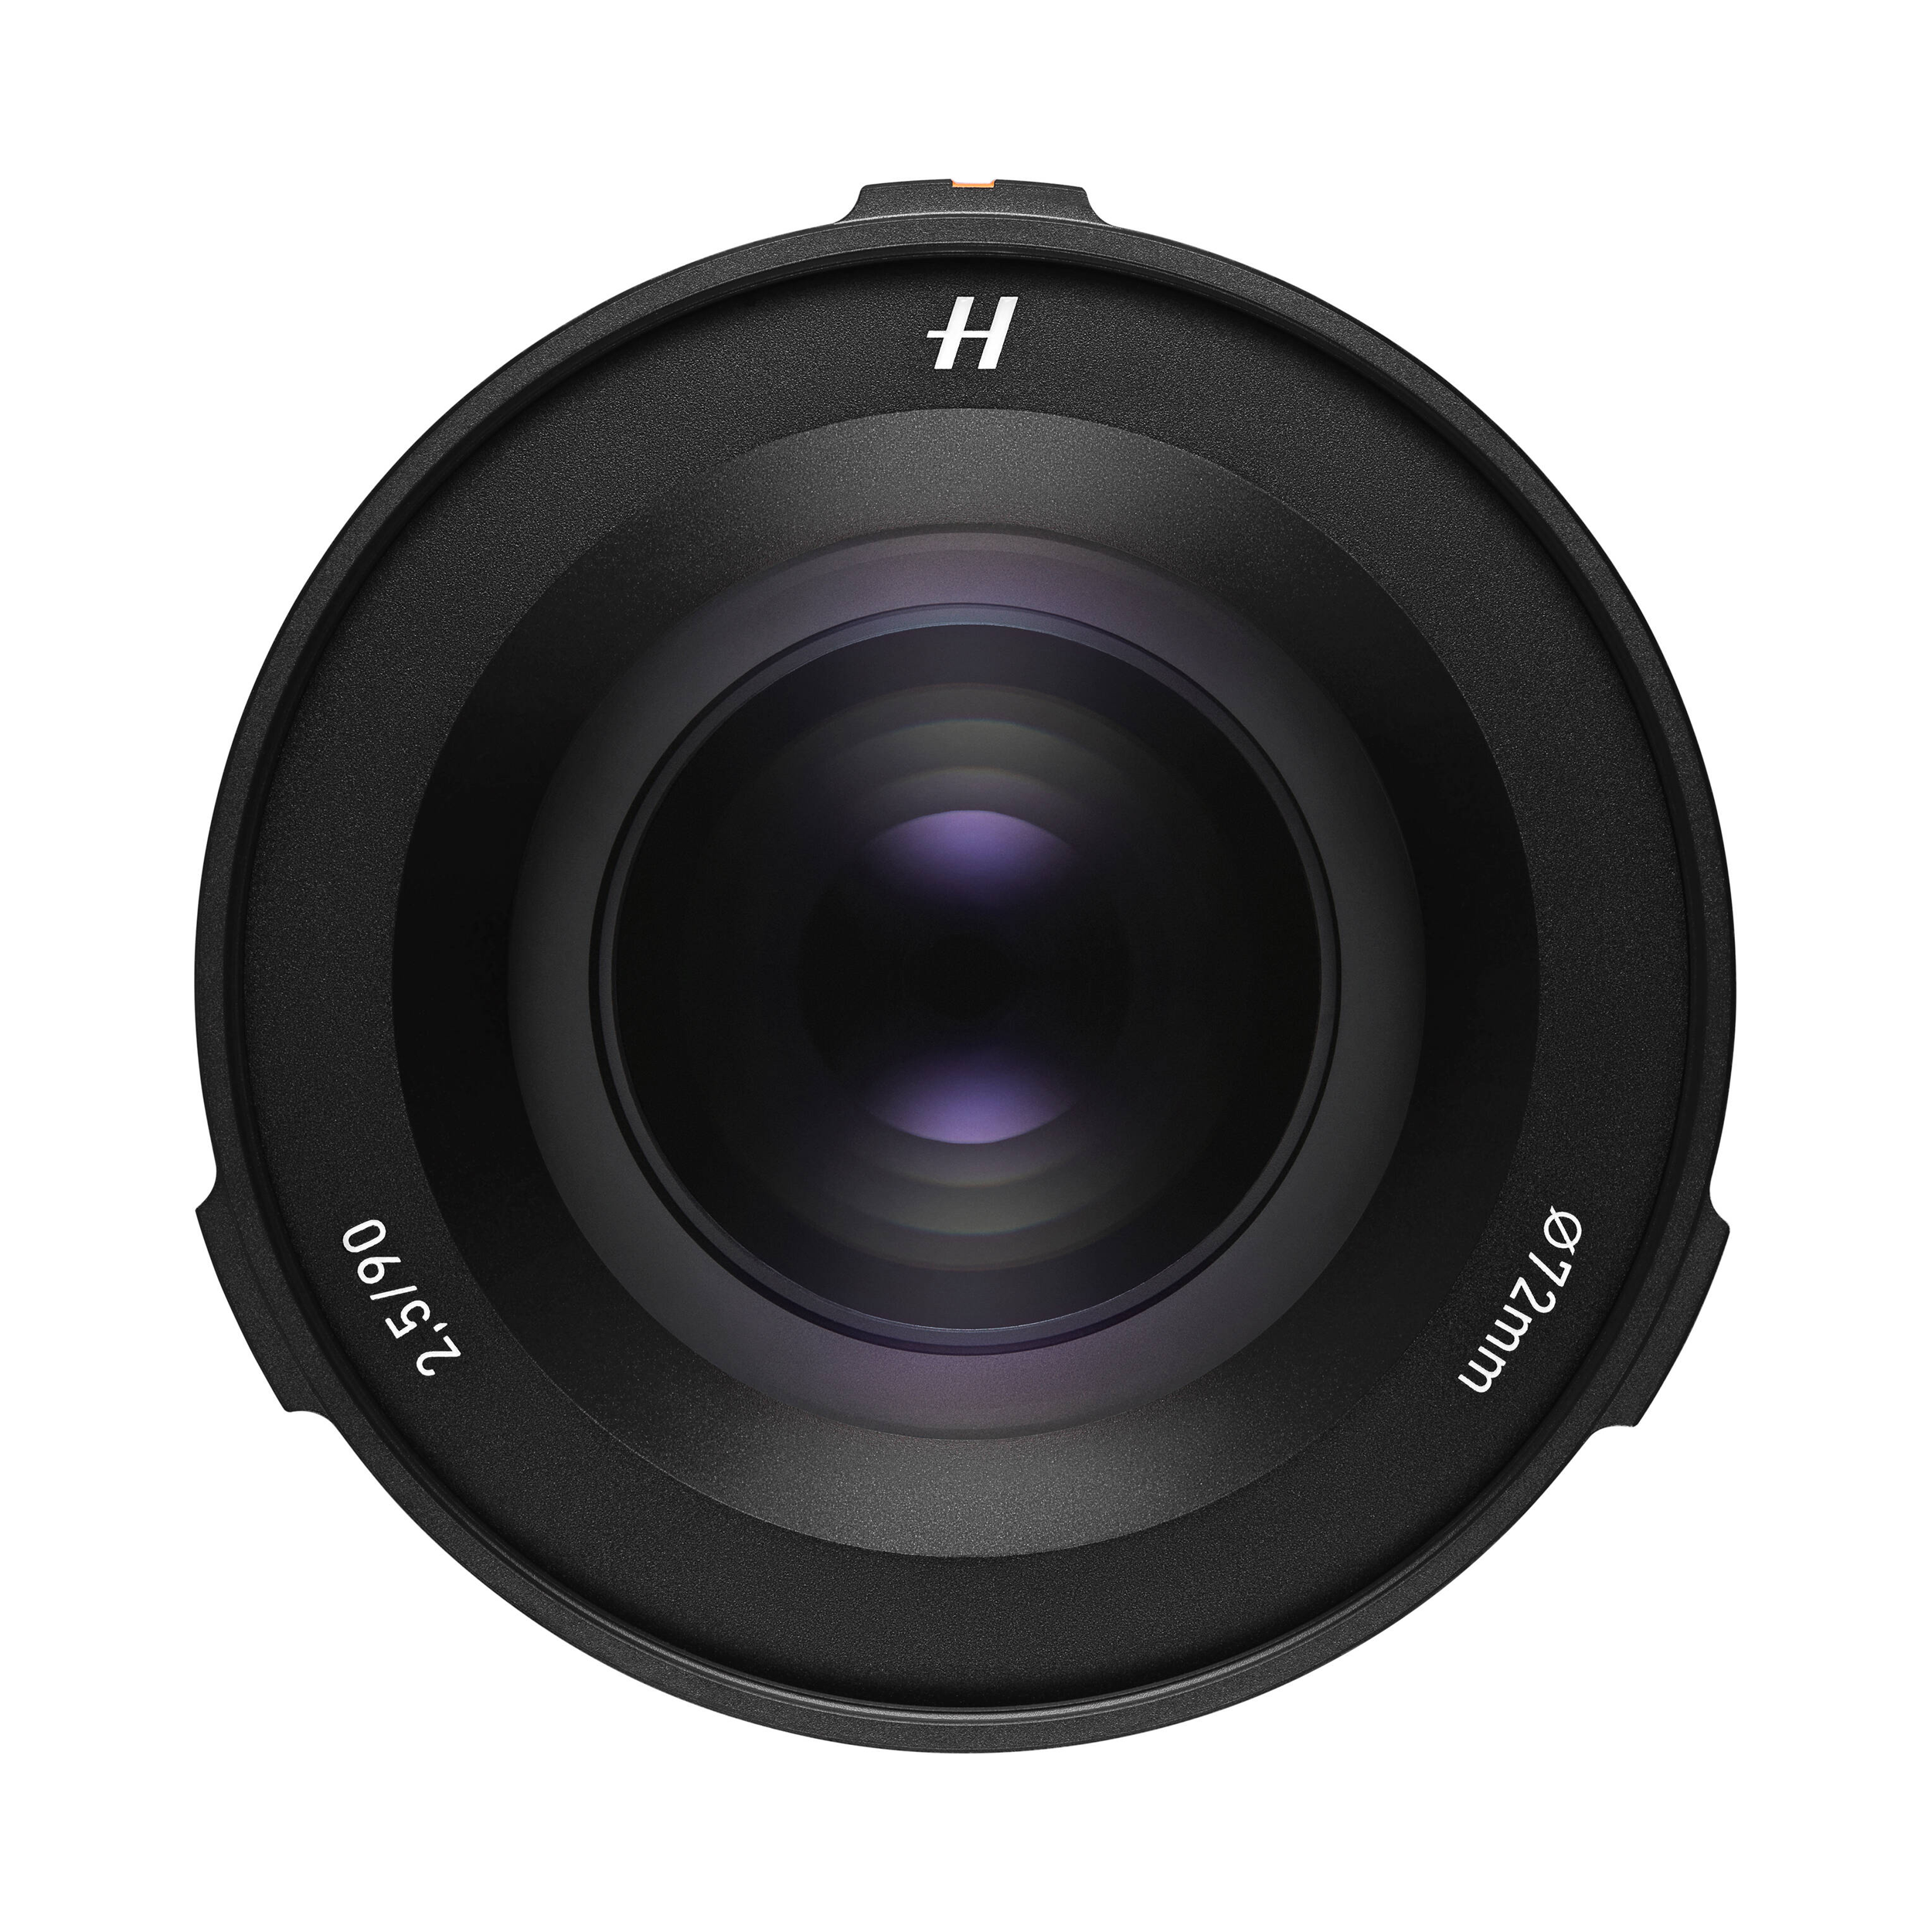 Hasselblad XCD 90 mm f / 2,5 V Lans